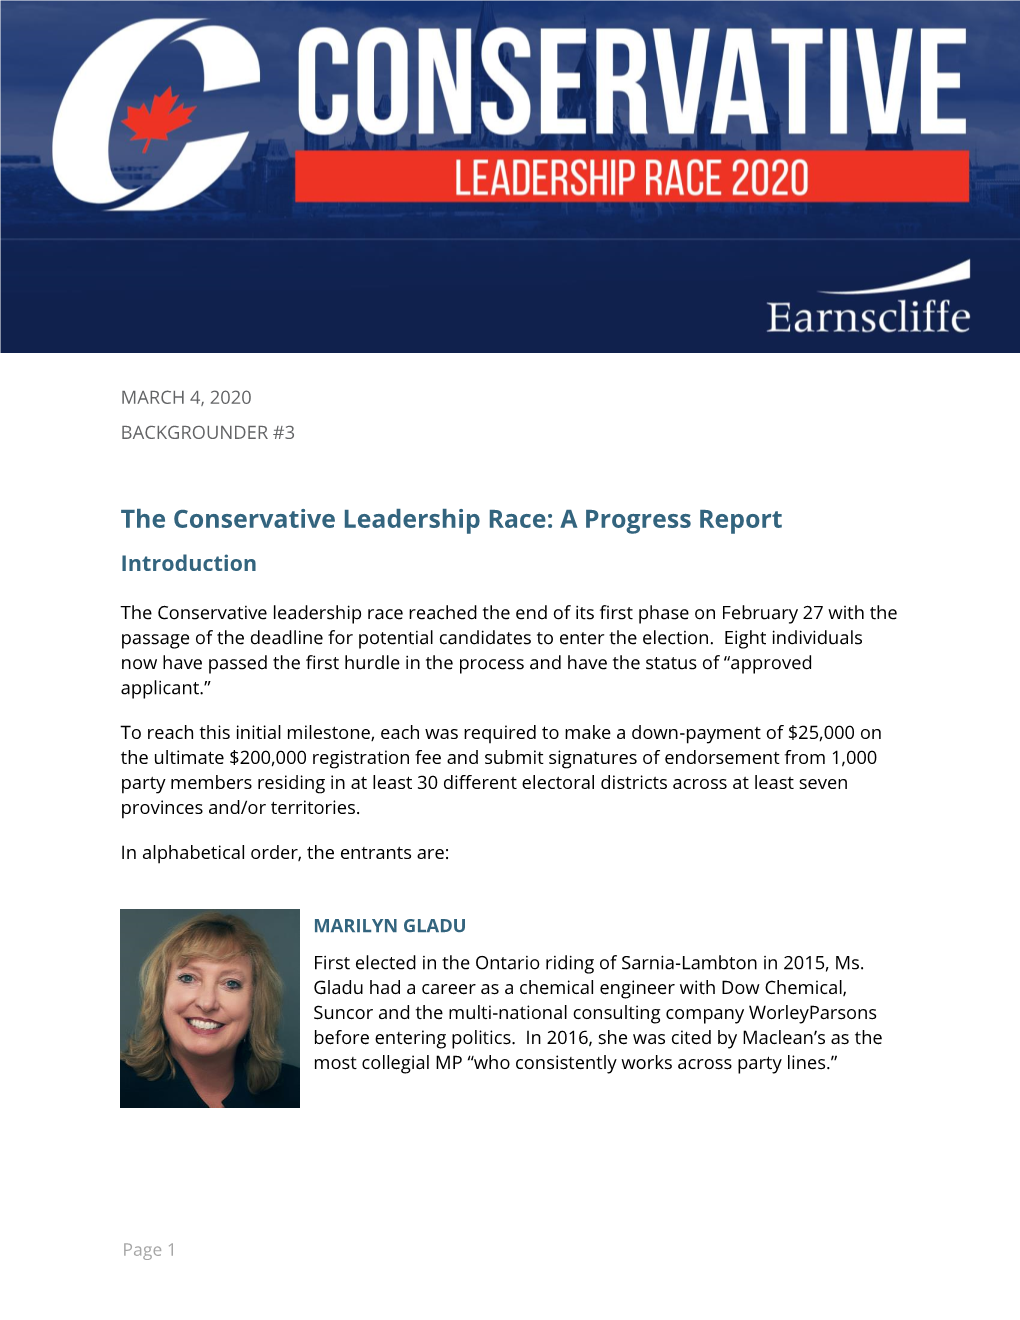 The Conservative Leadership Race: a Progress Report Introduction